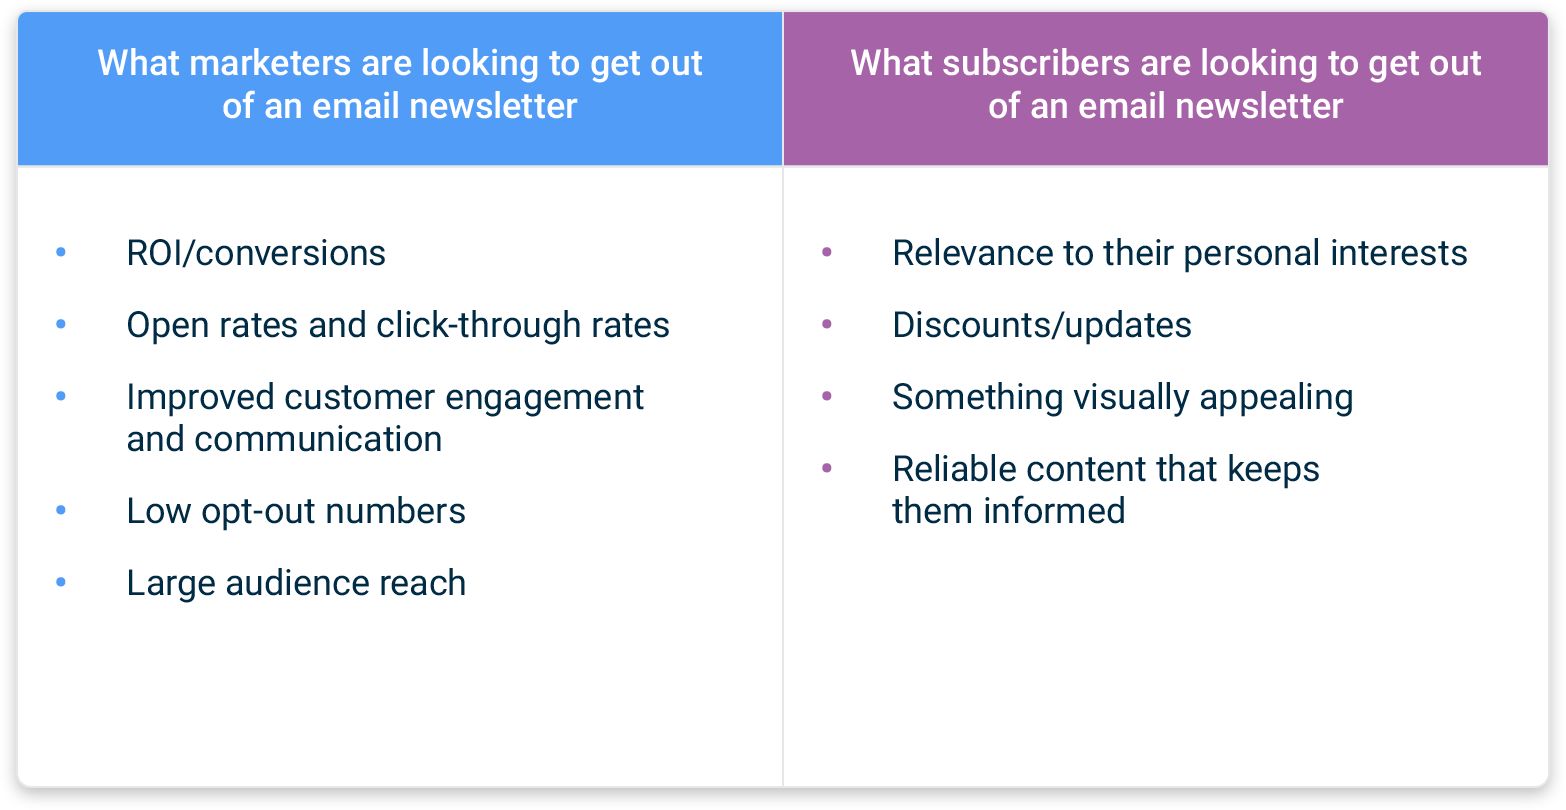  What marketers are looking to get out of an email newsletter: ROI/conversions, Open rates and click-through rates, Improved customer engagement and communication, Low opt-out numbers, Large audience reach What subscribers are looking to get out of an email newsletter: Relevance to their personal interests, Discounts/updates, Something visually appealing, Reliable content that keeps them informed